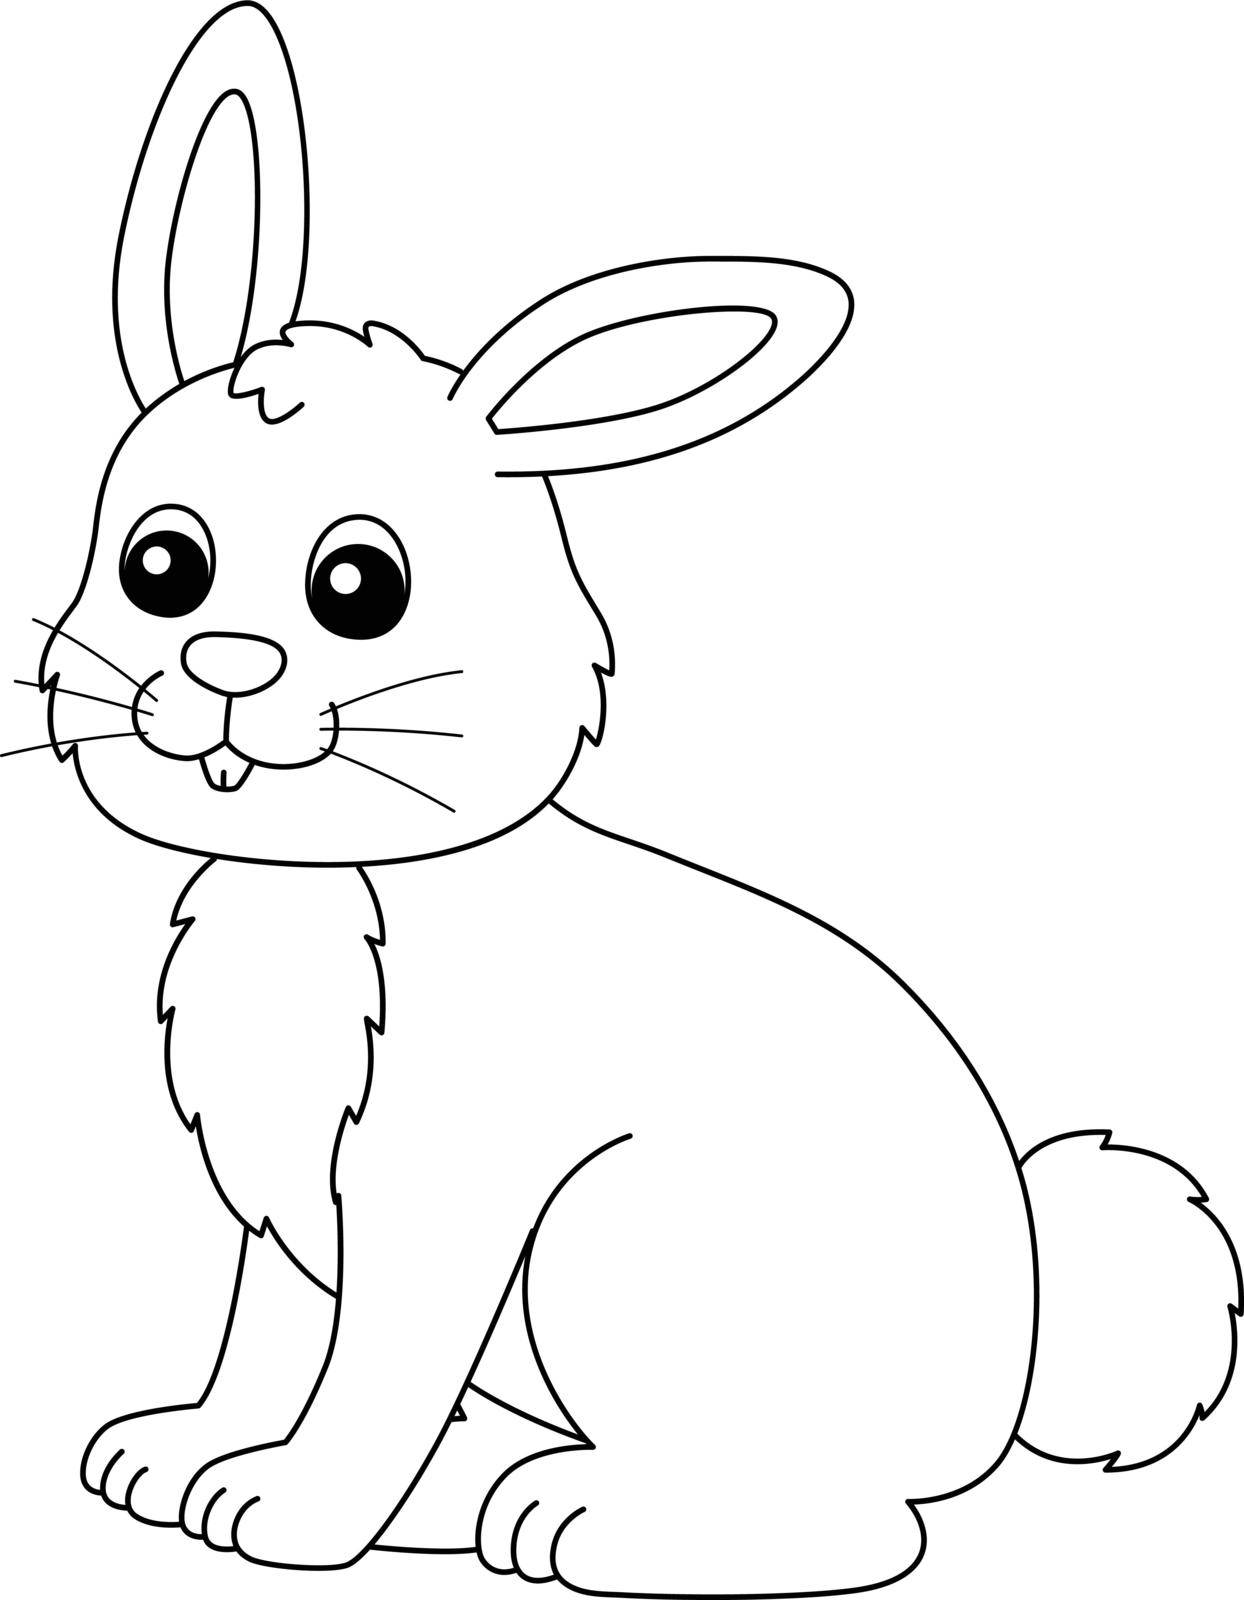 A cute and funny coloring page of a rabbit farm animal. Provides hours of coloring fun for children. To color, this page is very easy. Suitable for little kids and toddlers.